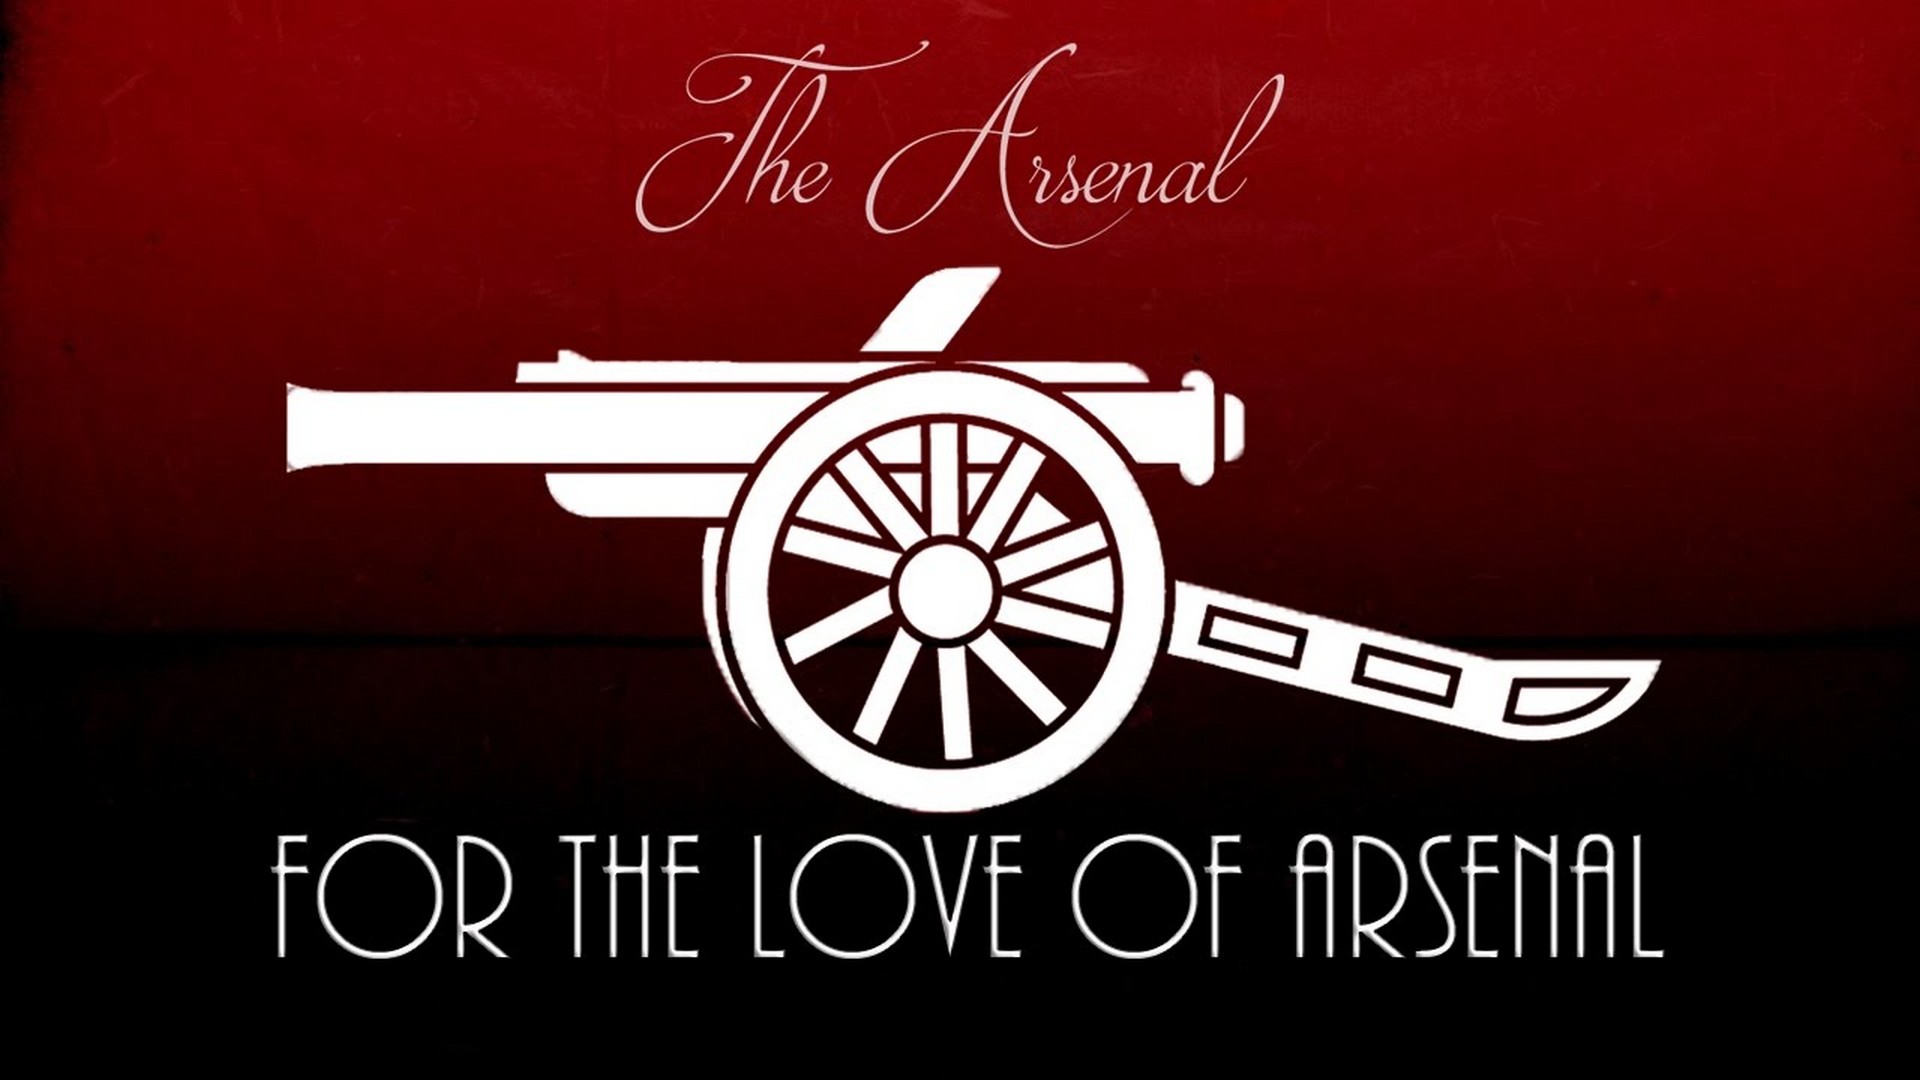 Wallpaper Desktop Arsenal Football Club HD with resolution 1920x1080 pixel. You can make this wallpaper for your Mac or Windows Desktop Background, iPhone, Android or Tablet and another Smartphone device